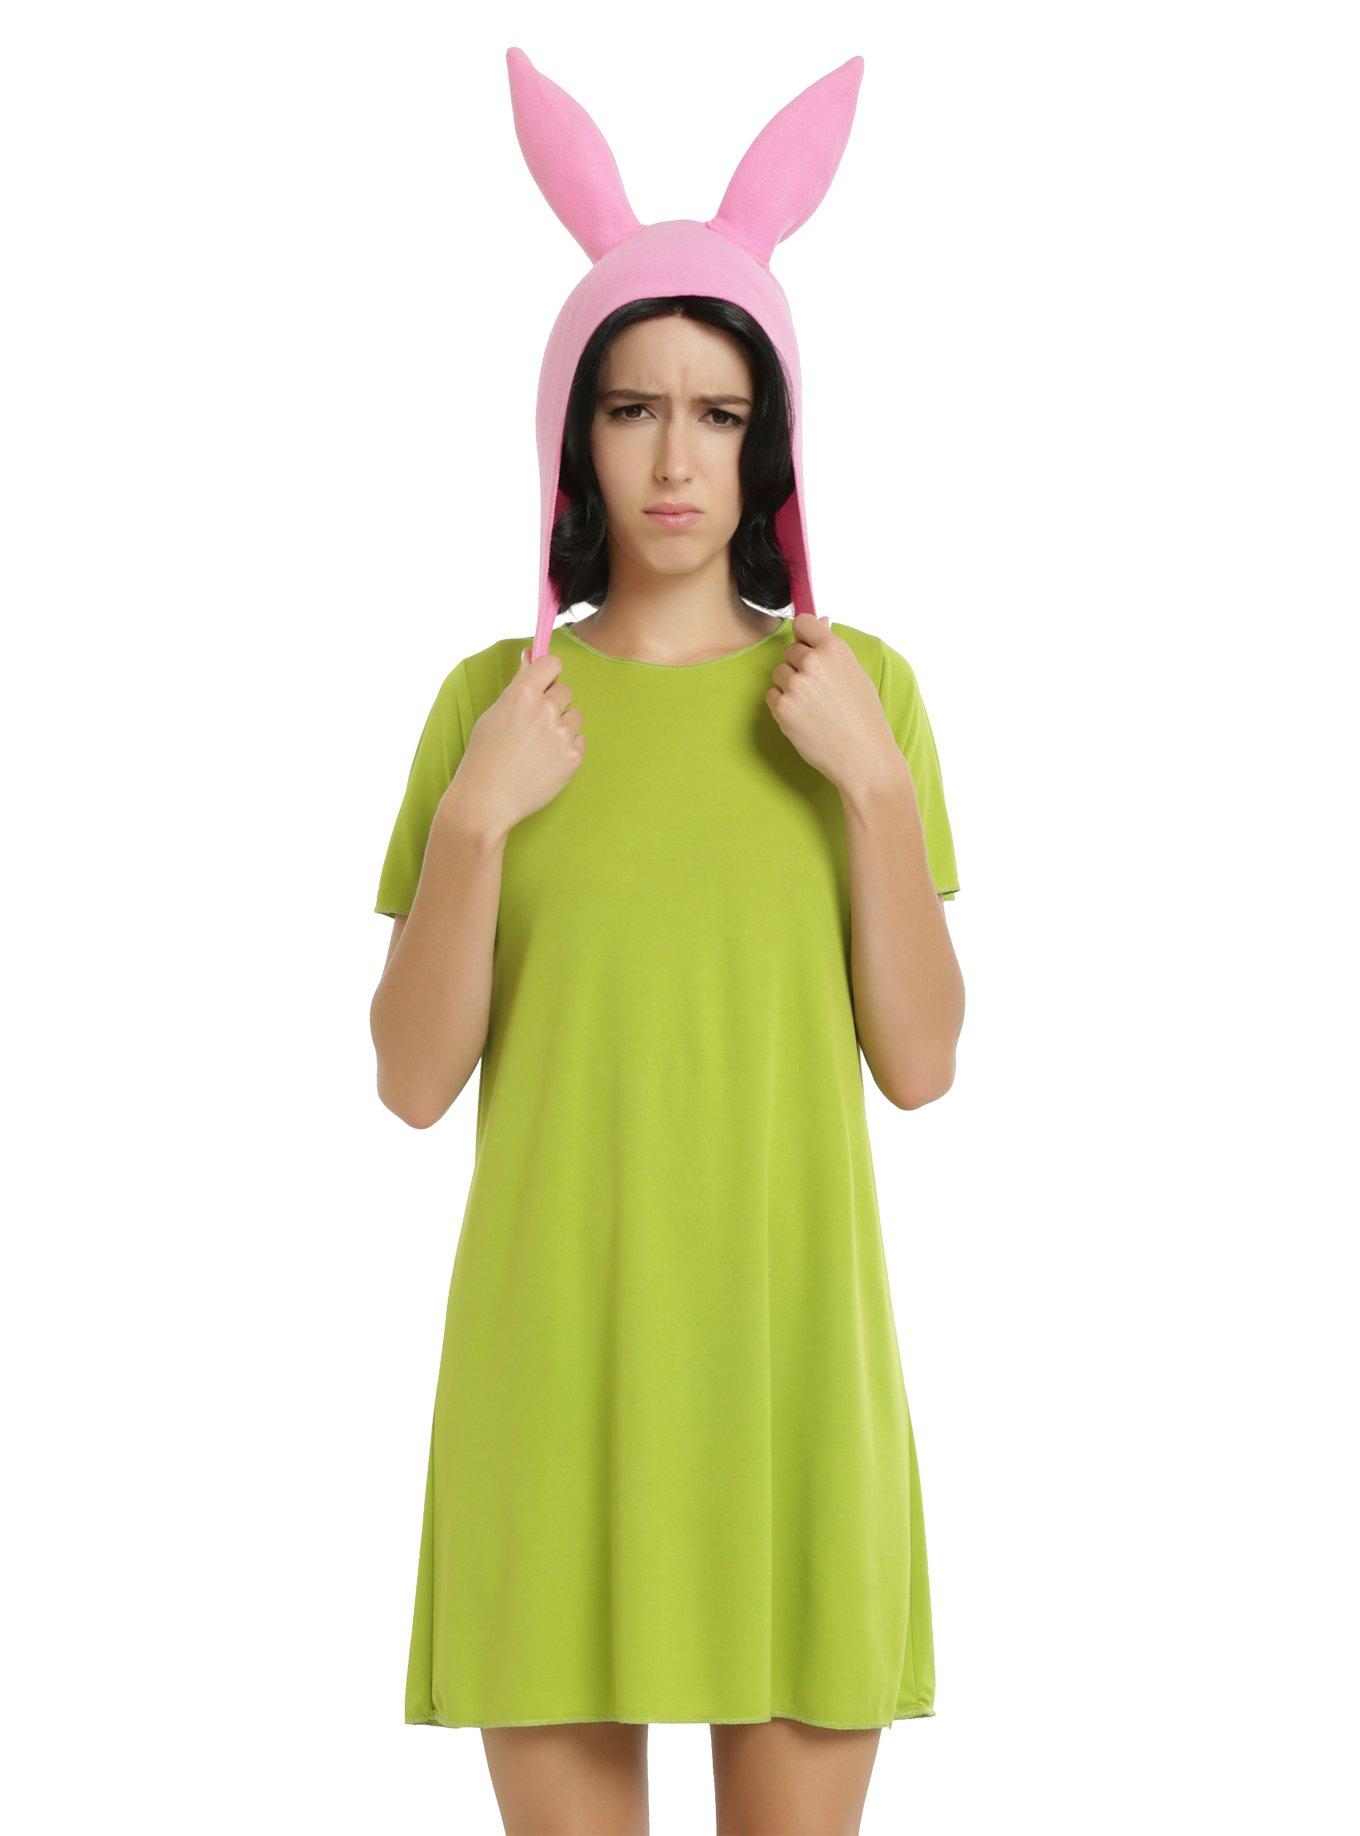  Louise Belcher Hat: Clothing, Shoes & Jewelry